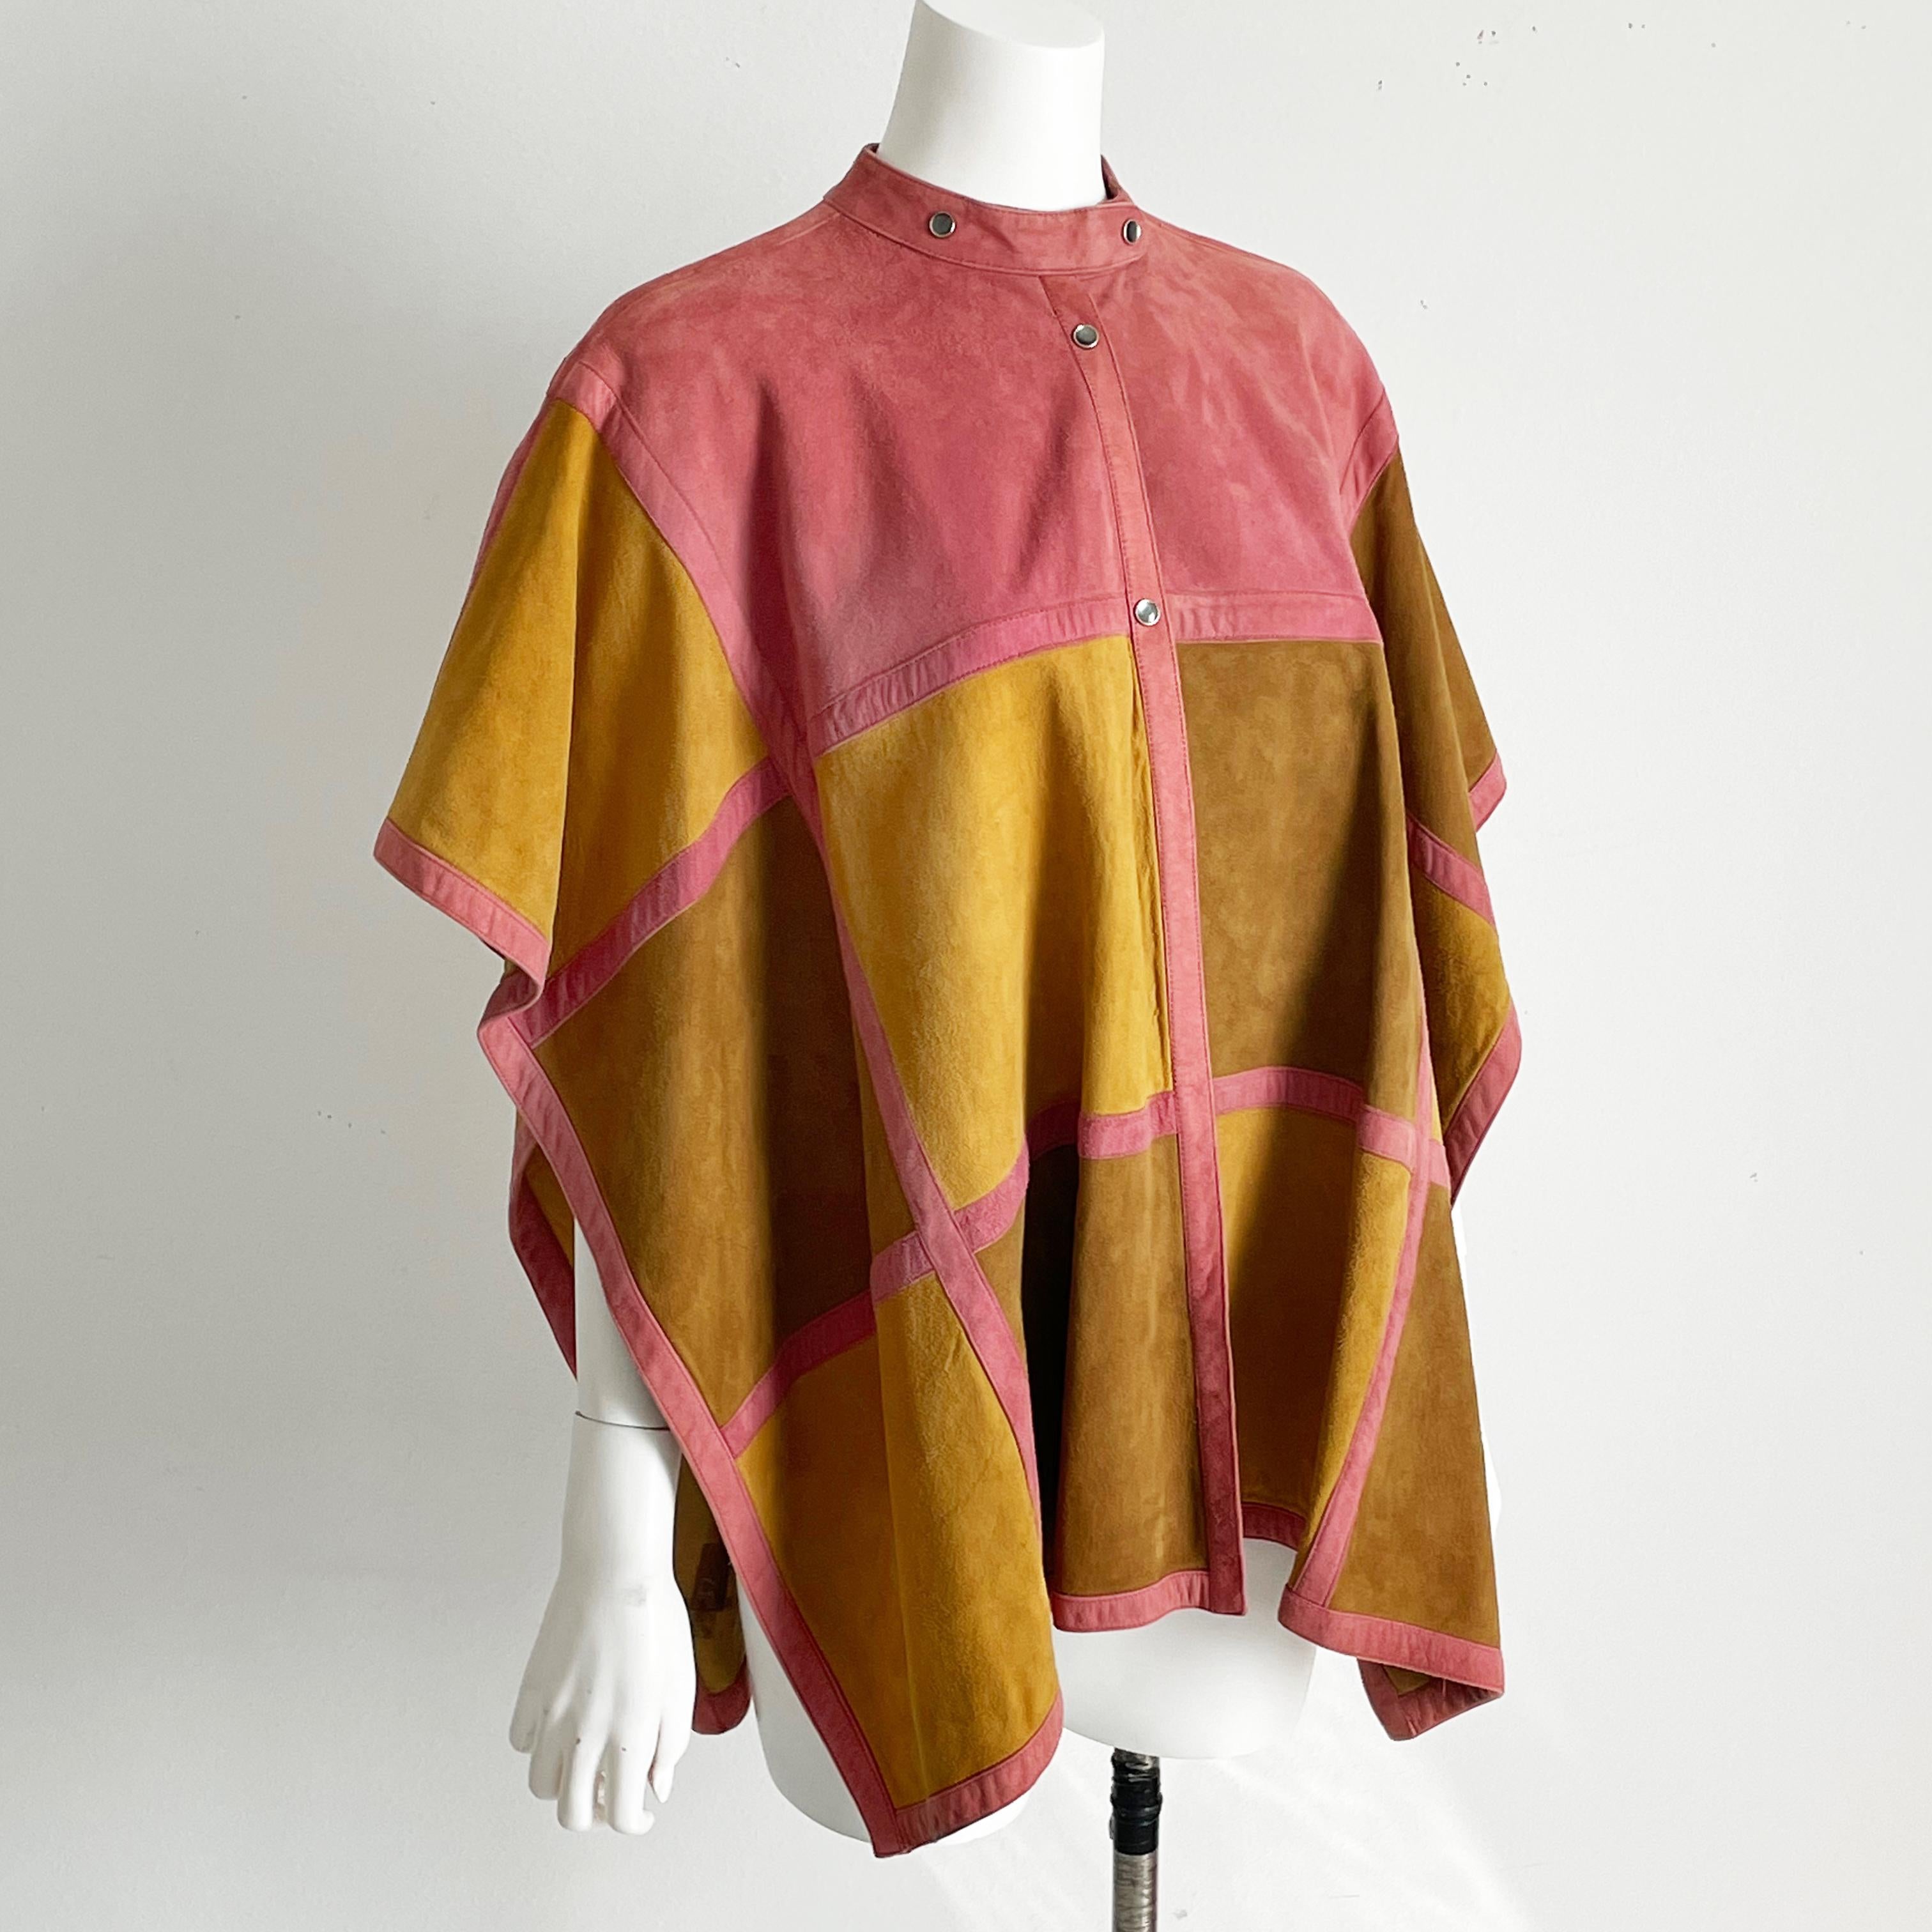 Bonnie Cashin for Sills Poncho Cape Suede Patchwork Pink Olive Vintage 70s S/M For Sale 1